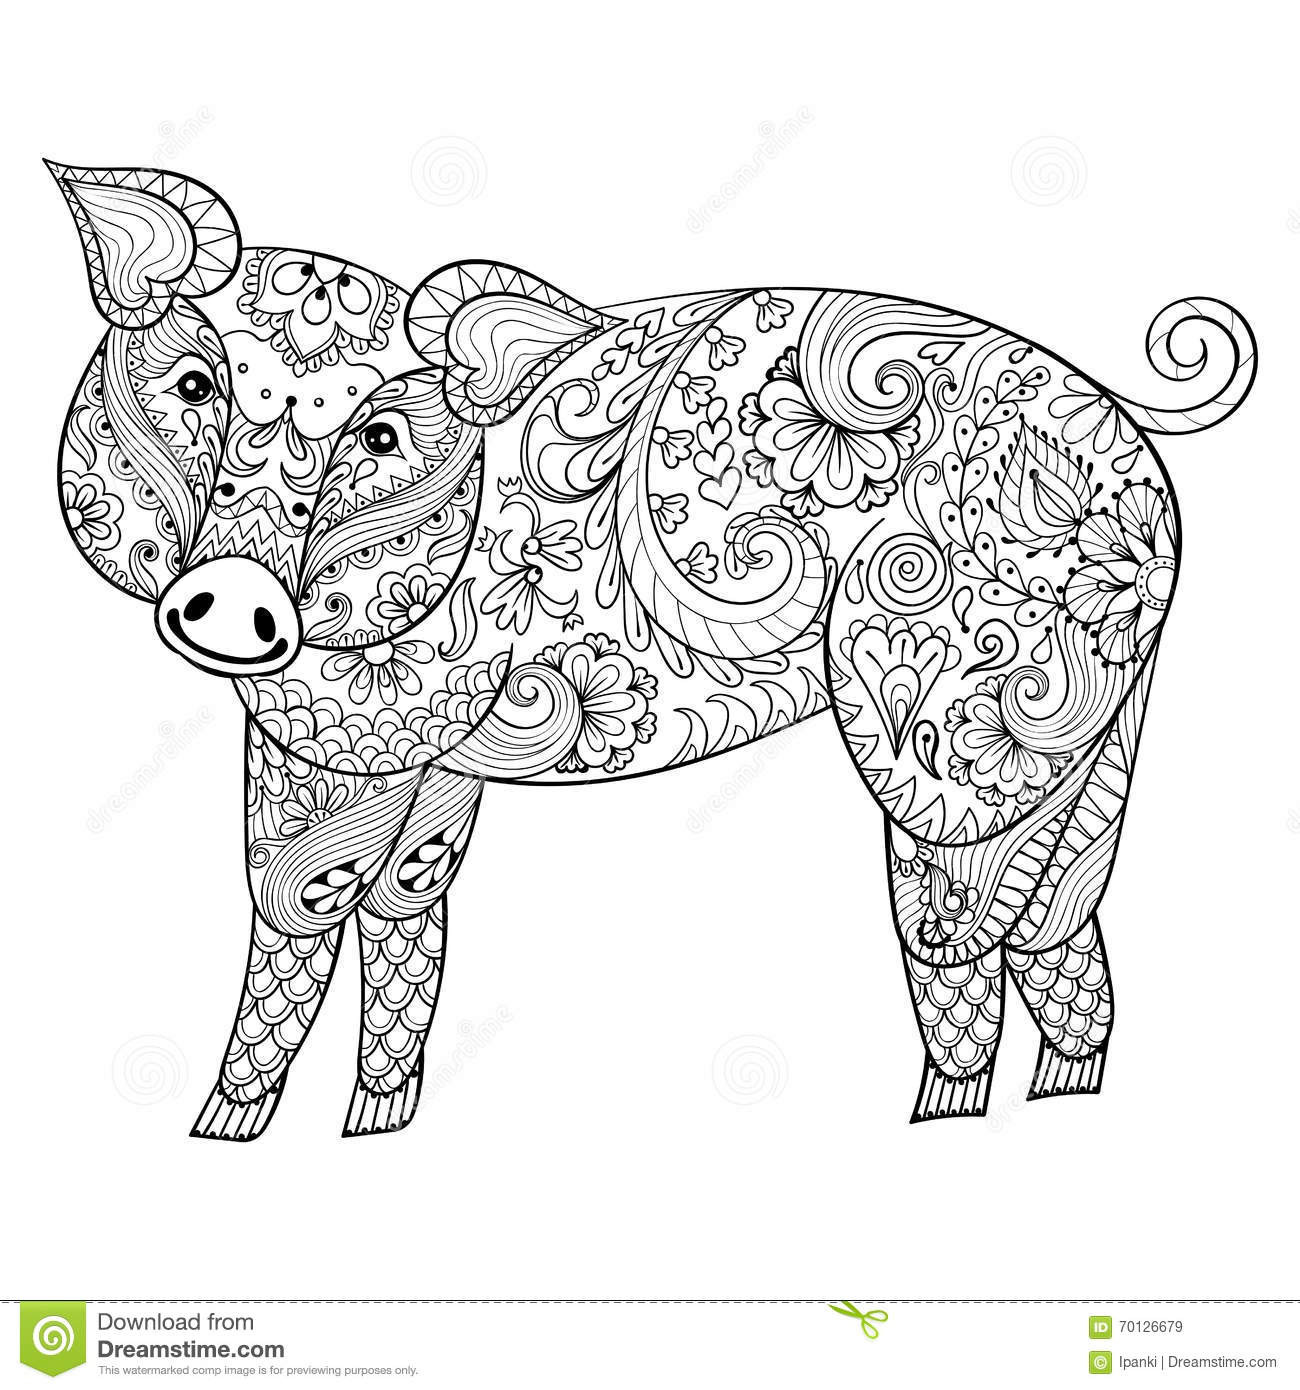 Pig Coloring Pages For Adults
 Vector Pig Zentangle Pig Illustration Swine Print For